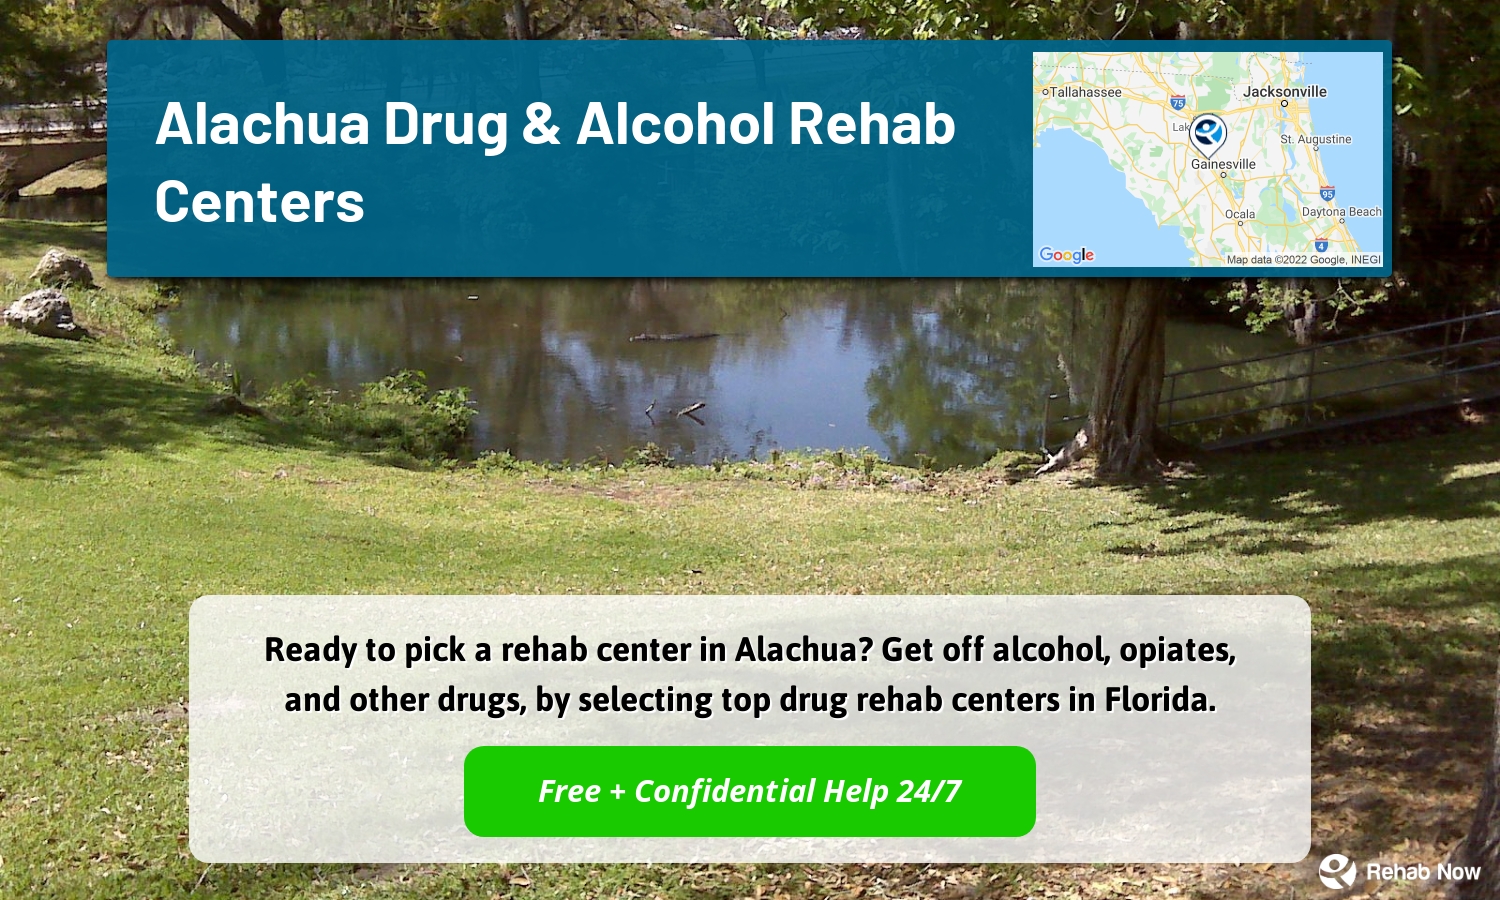 Ready to pick a rehab center in Alachua? Get off alcohol, opiates, and other drugs, by selecting top drug rehab centers in Florida.